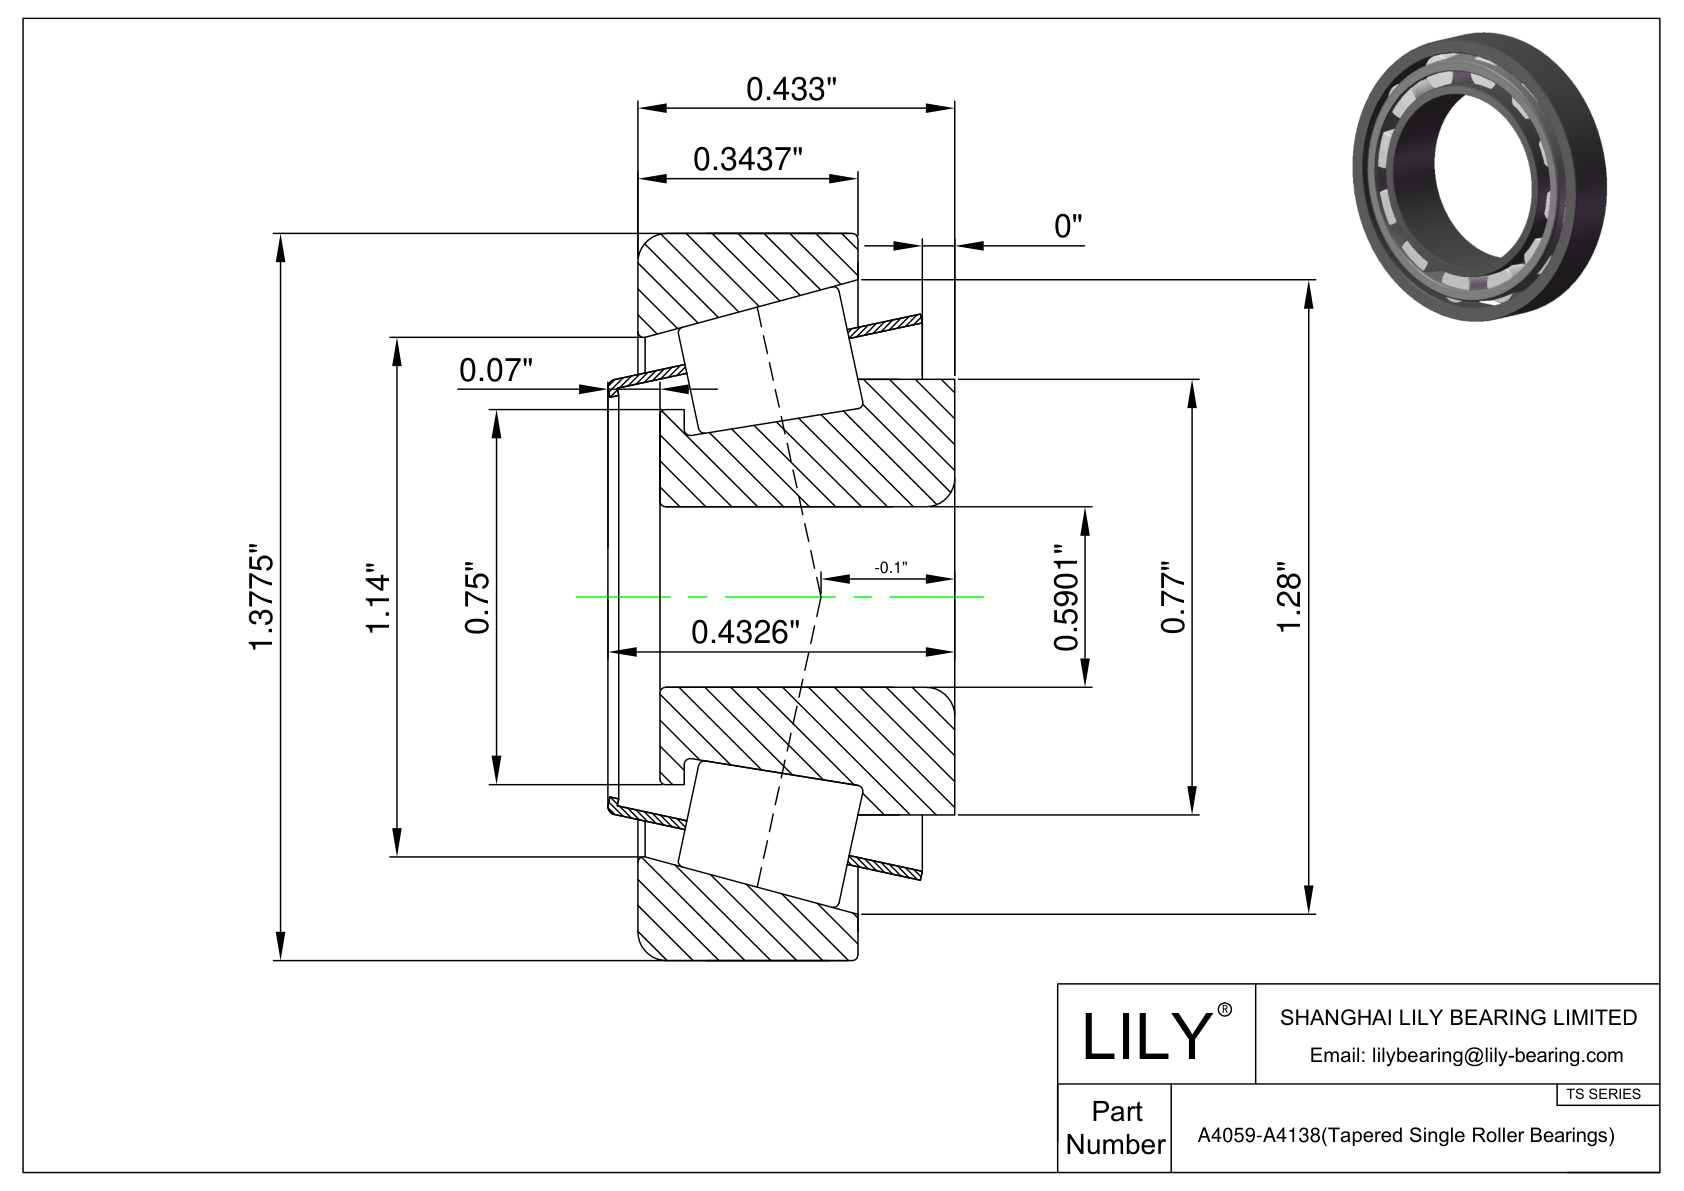 A4059-A4138 TS (Tapered Single Roller Bearings) (Imperial) cad drawing